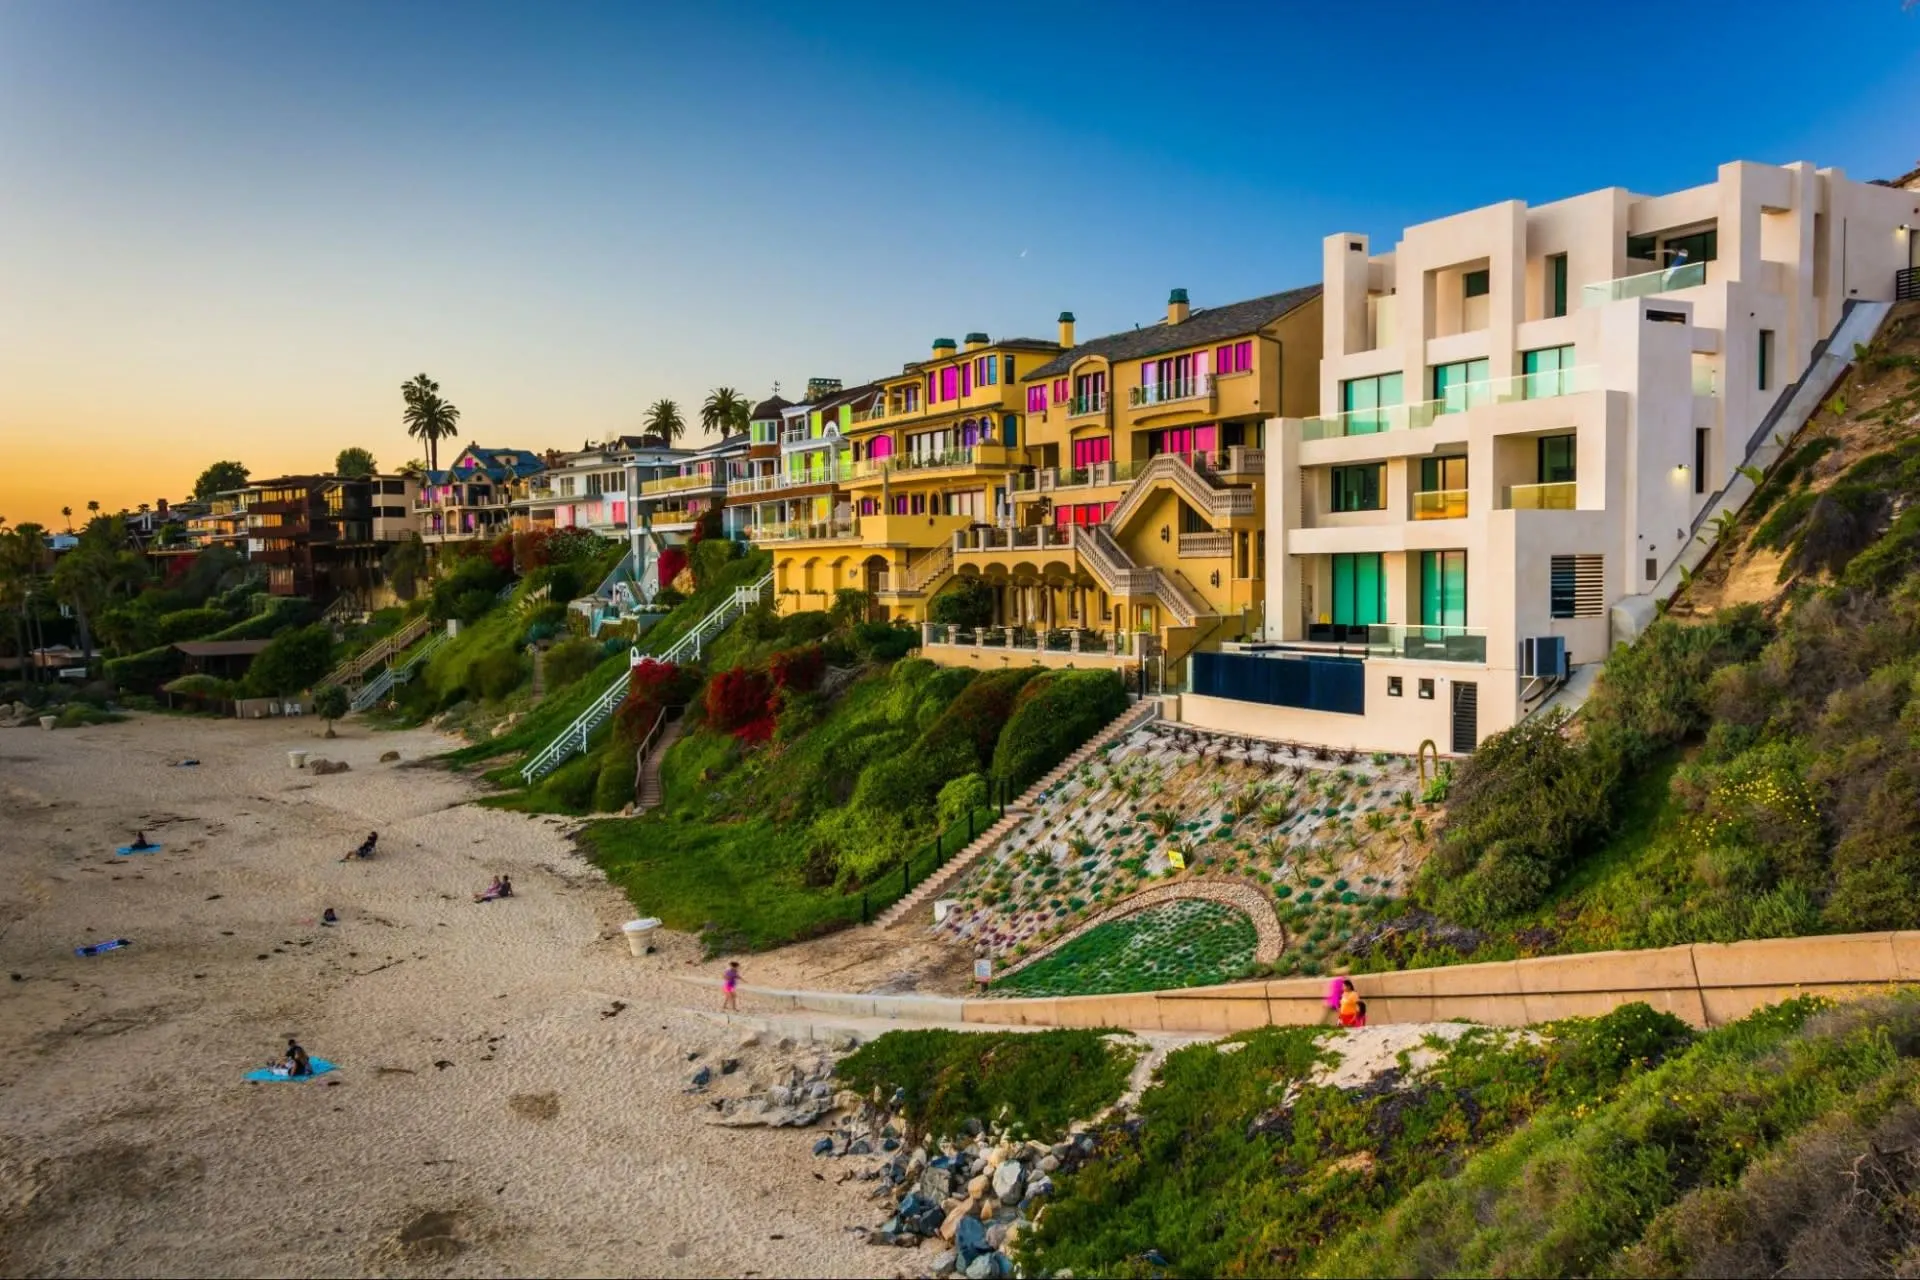 Colorful beach houses on a hill overlooking the ocean.